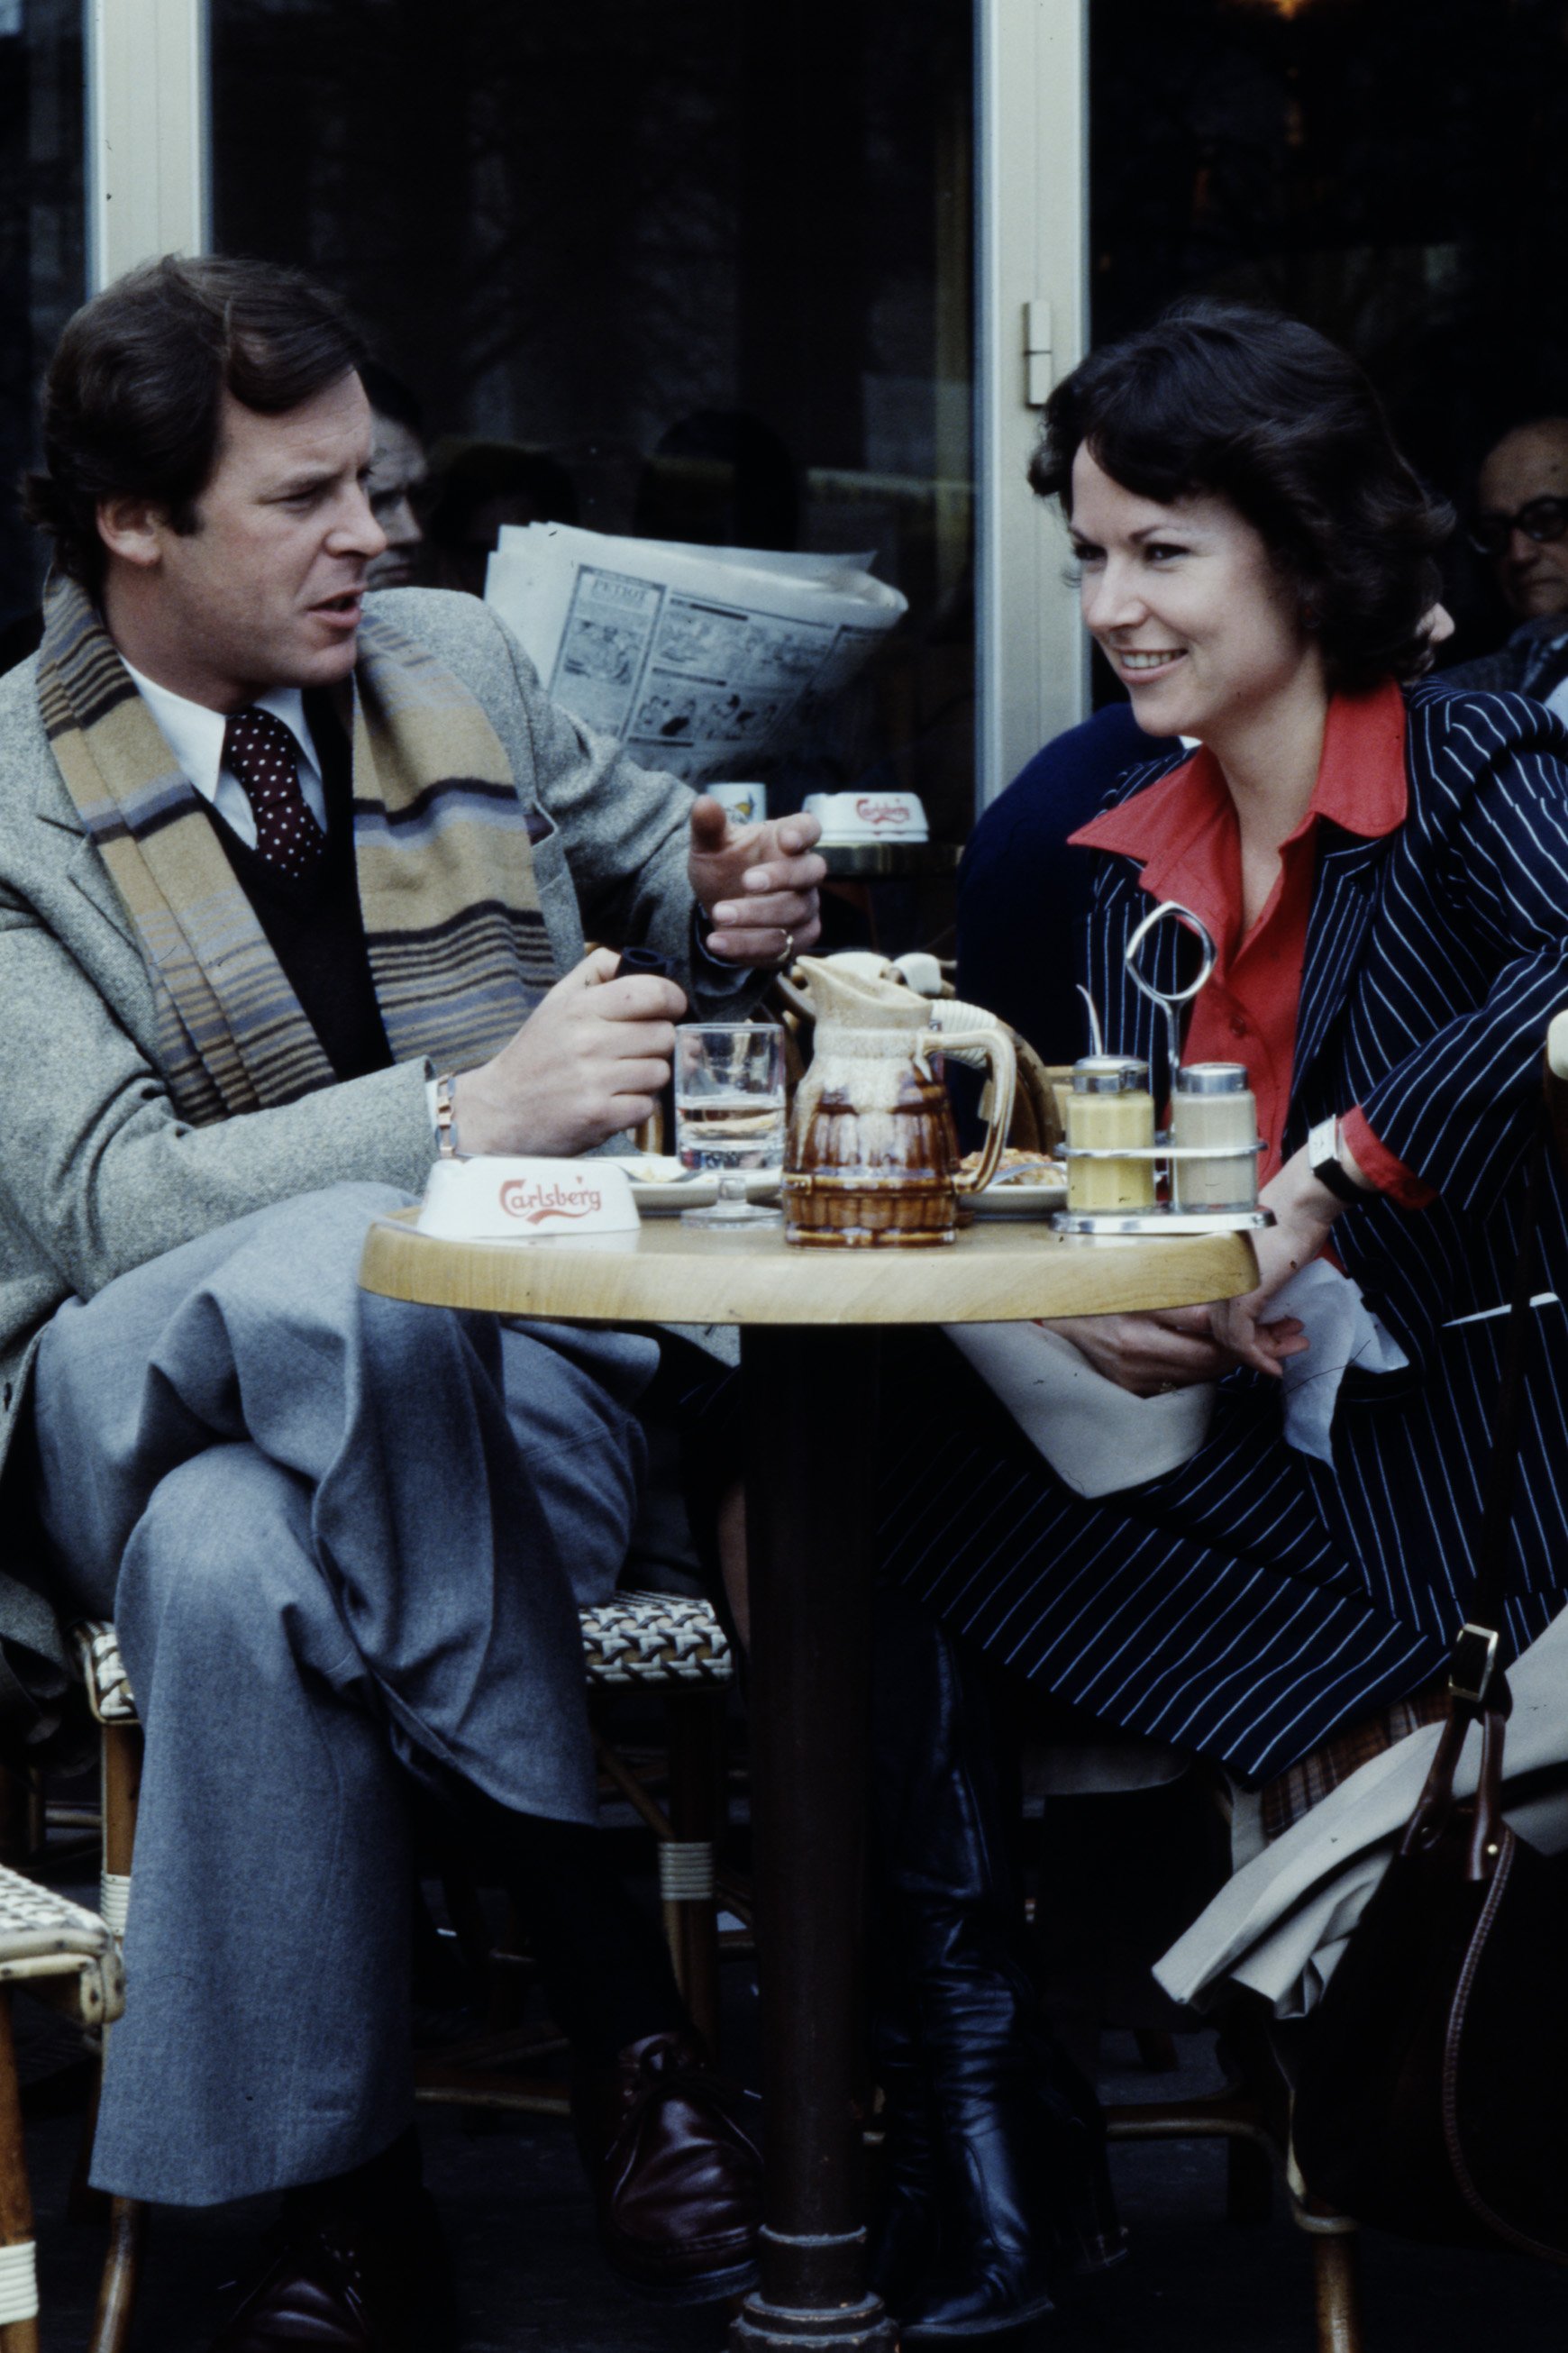 Peter Jennings and Kati Marton eating at a cafe in Paris, France | Source: Getty Images